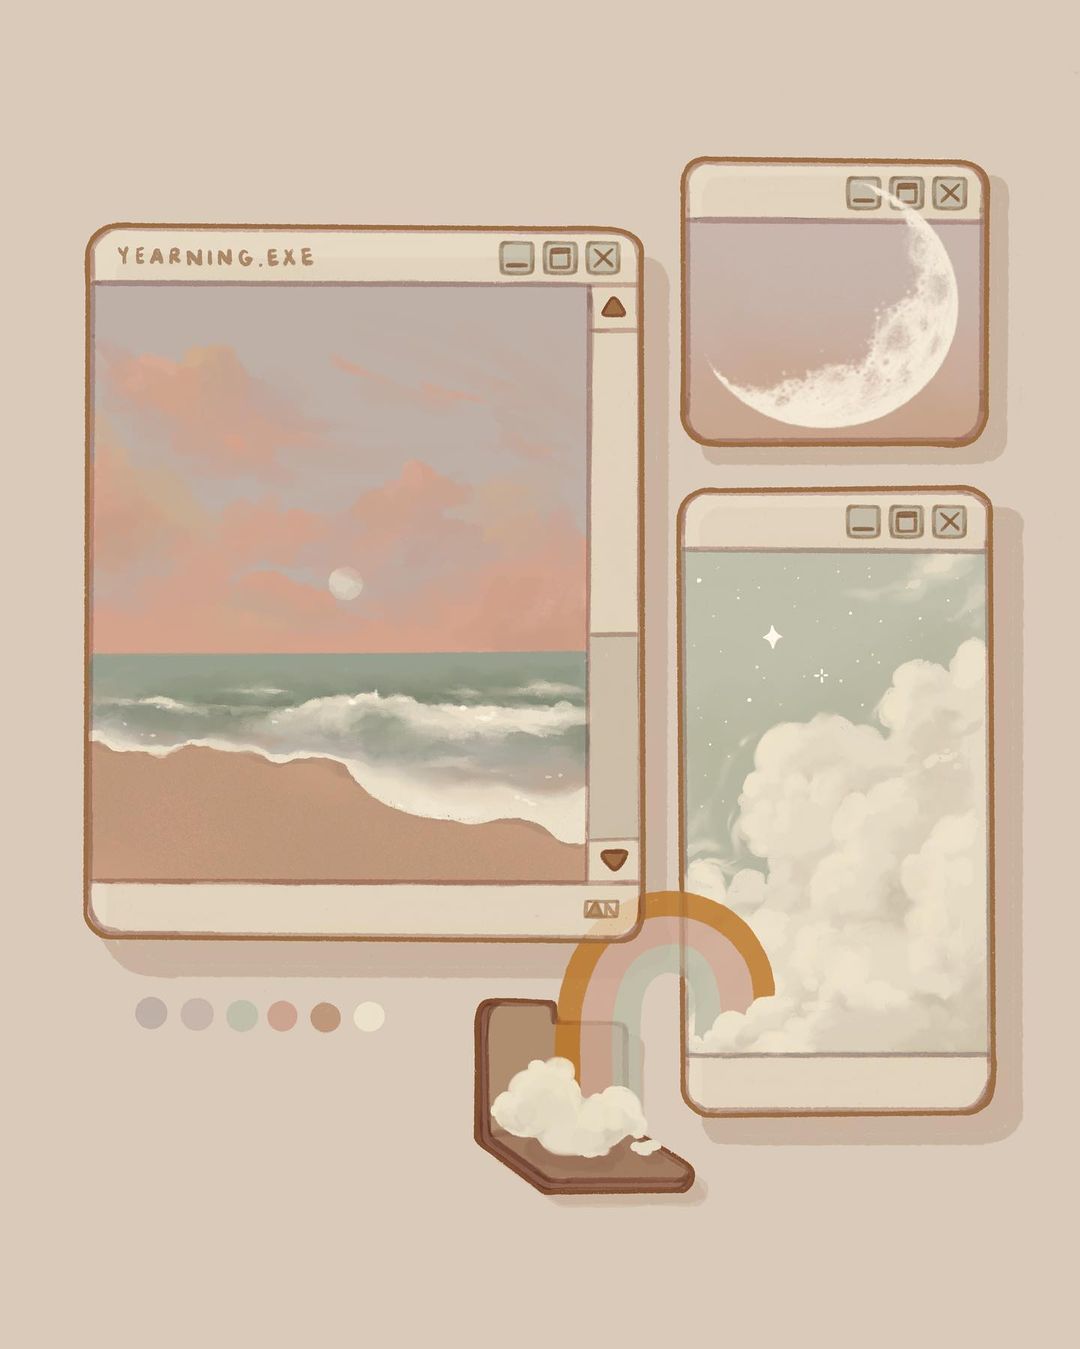 Aesthetic phone background illustrations of the beach, moon, and clouds - Illustration